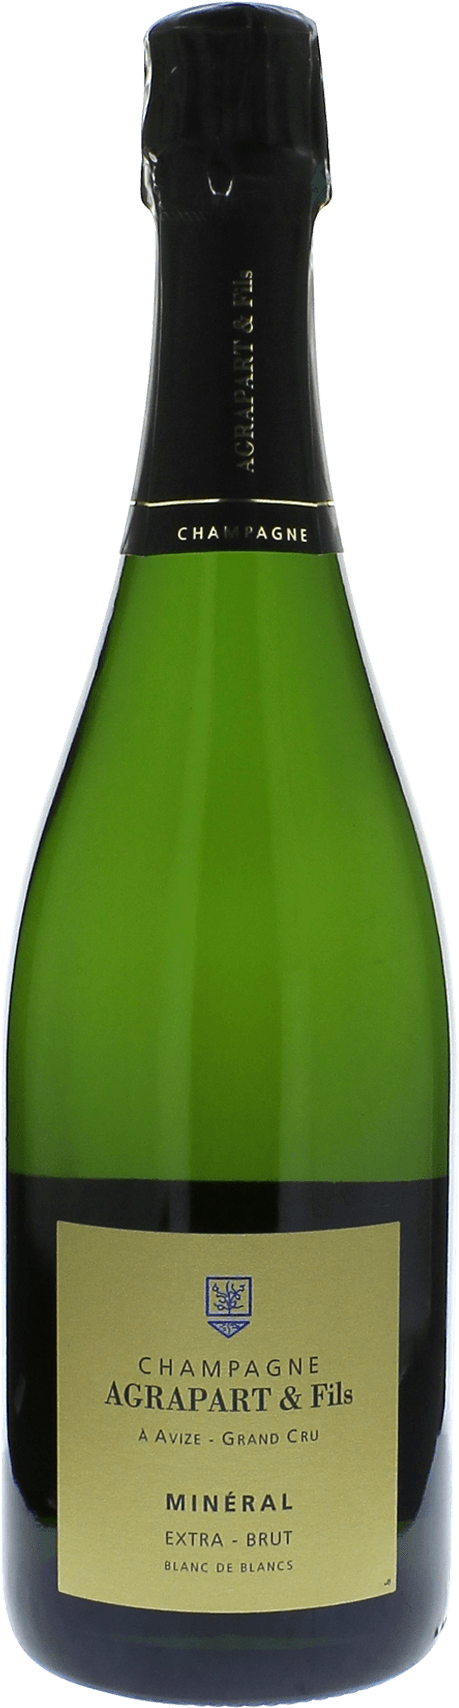 Agrapart  mineral extra brut blanc de blancs 2013  Agrapart, Champagne